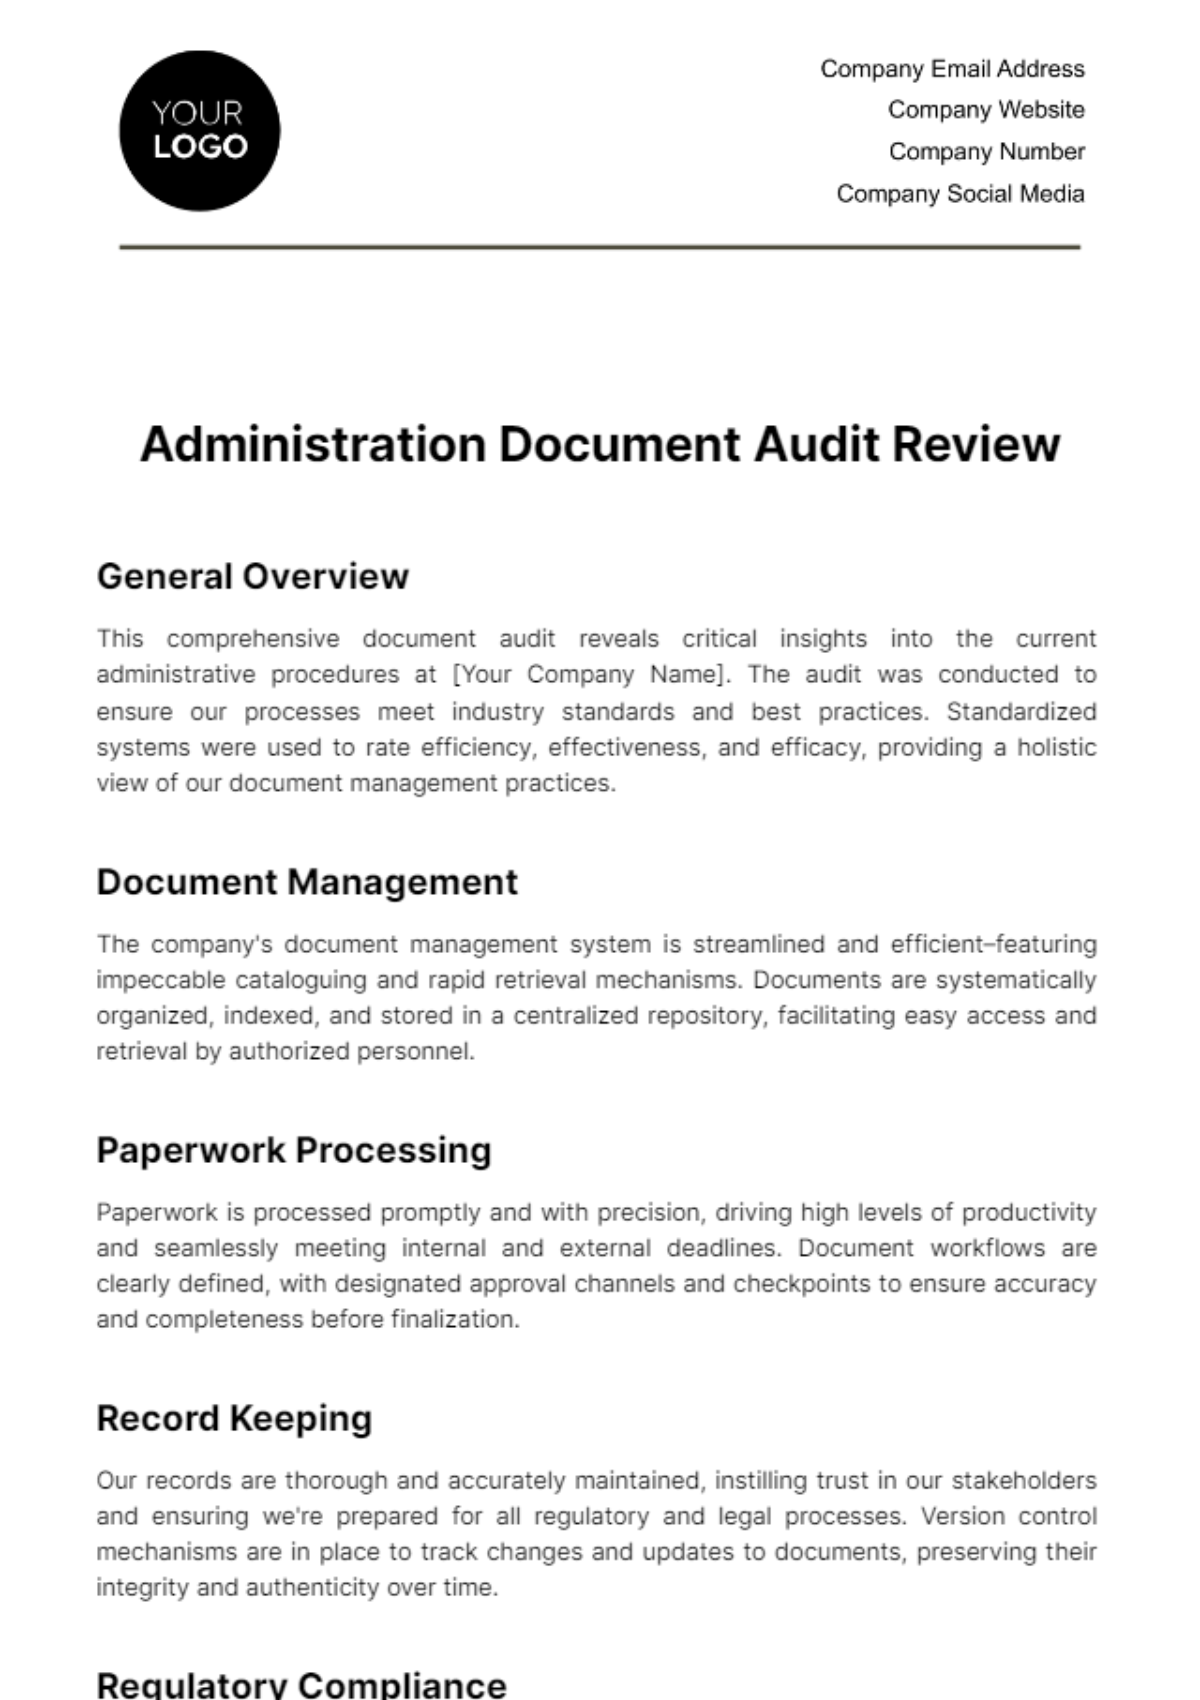 Administration Document Audit Review Template